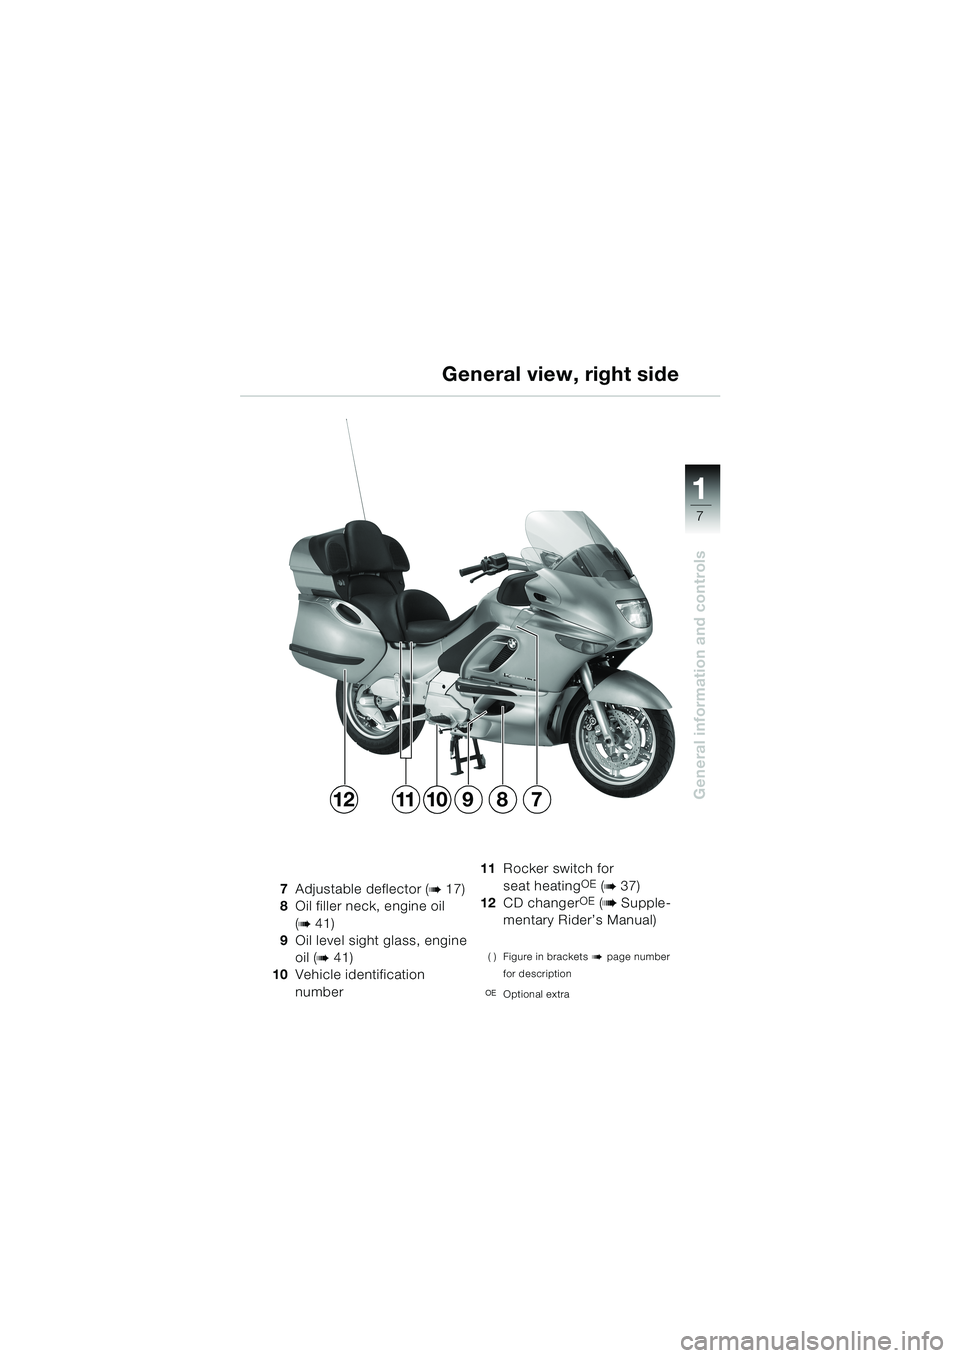 BMW MOTORRAD K 1200 LT 2002  Riders Manual (in English) 7
General information and controls
1
General view, right side
7Adjustable deflector (b 17)
8Oil filler neck, engine oil 
(
b 41)
9Oil level sight glass, engine 
oil (
b 41)
10Vehicle identification 
n